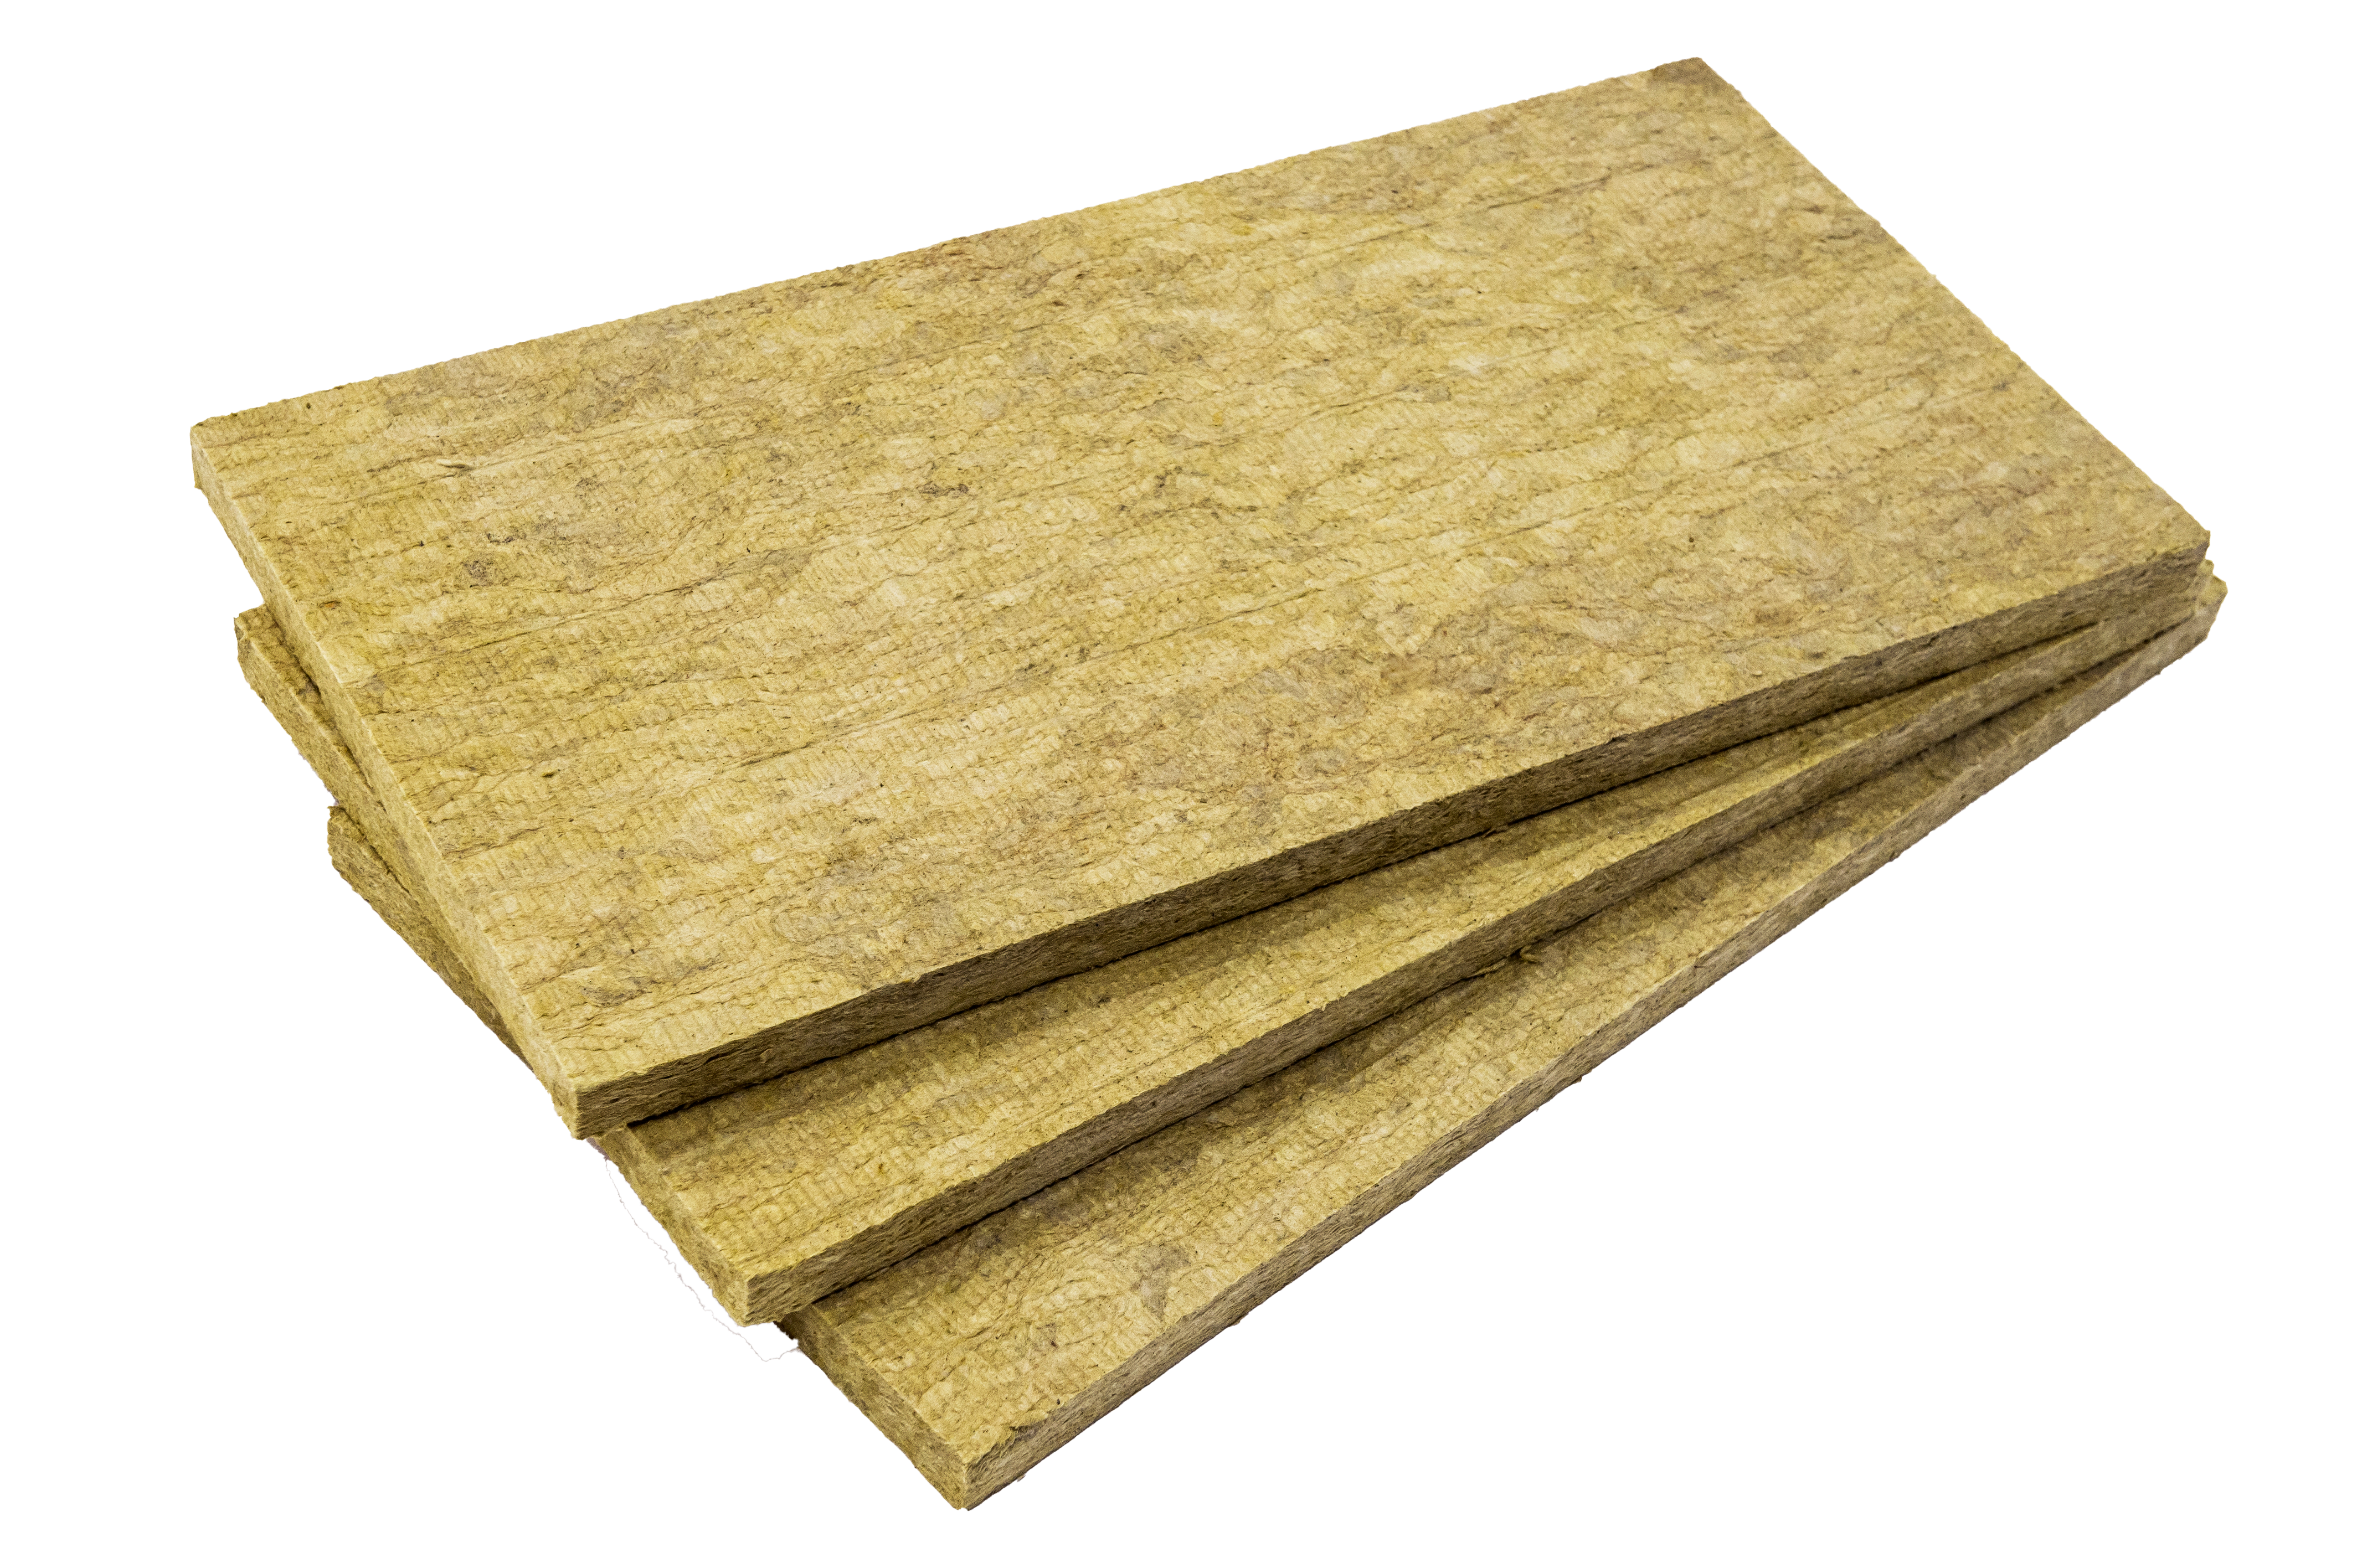 RoofLogic product information for Stonewool